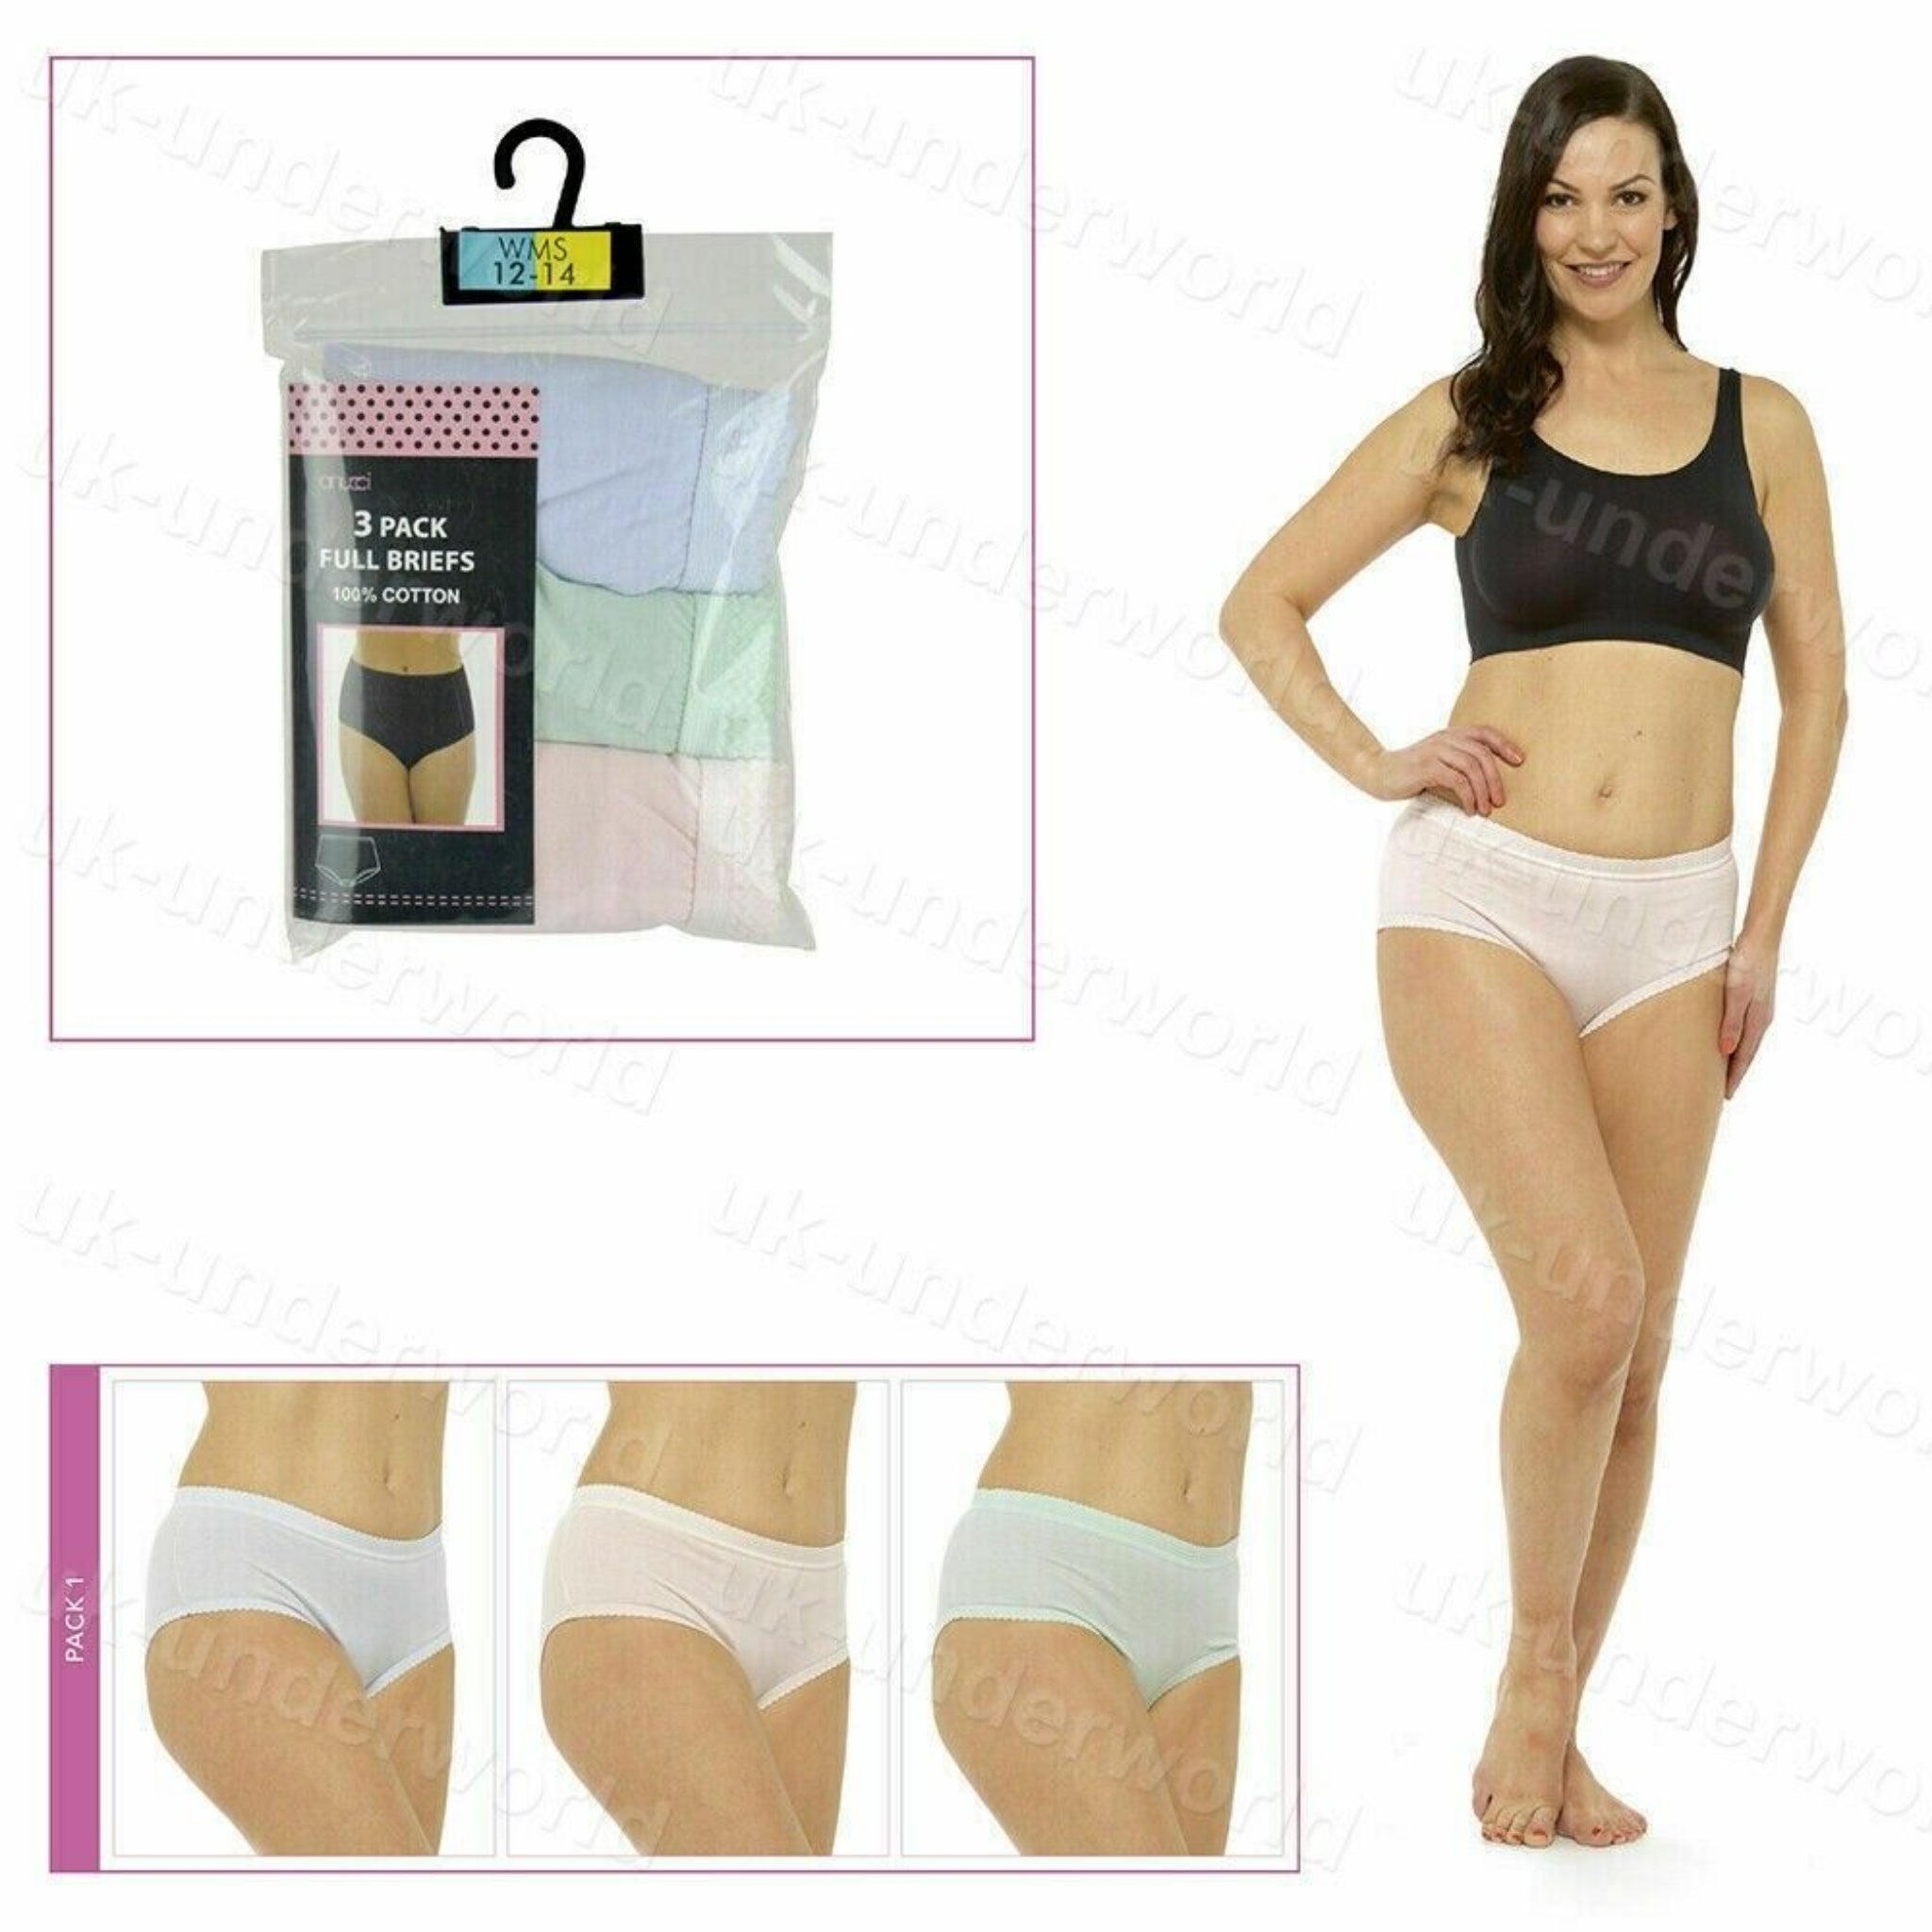 Beclen Harp 3 Pair Women/Ladies Cotton Full Briefs Pants Knickers Underwears For Adults Size 12-26-Perfect Christmas/Xmas Gift